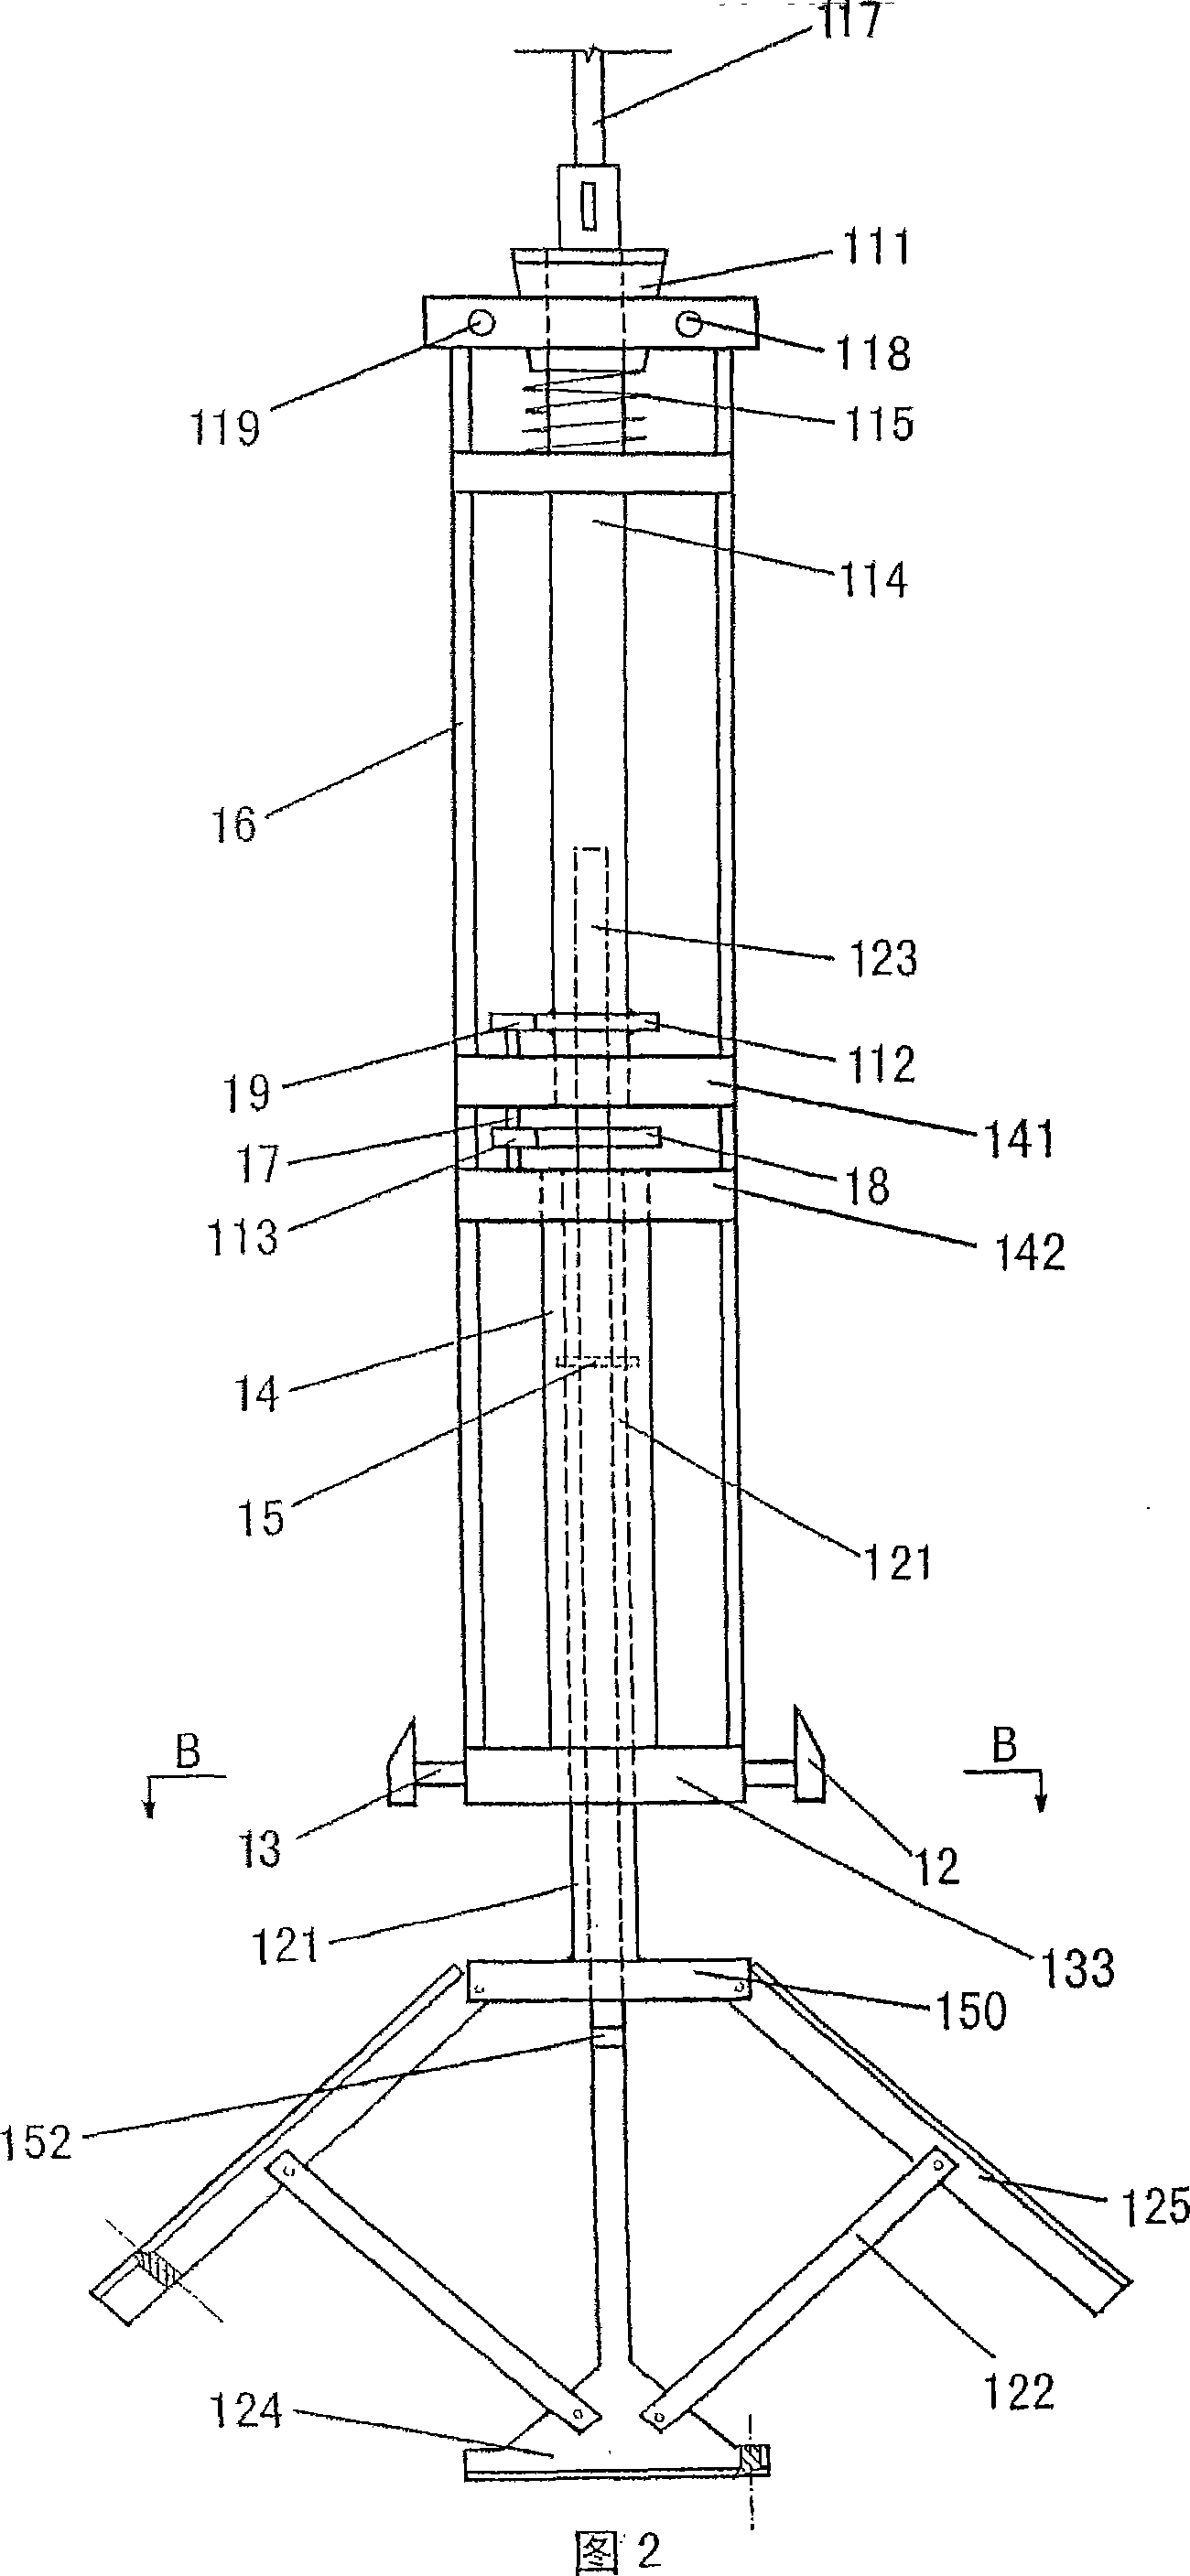 Bottom-expanding pile-forming method for immersed tube club-footed pile